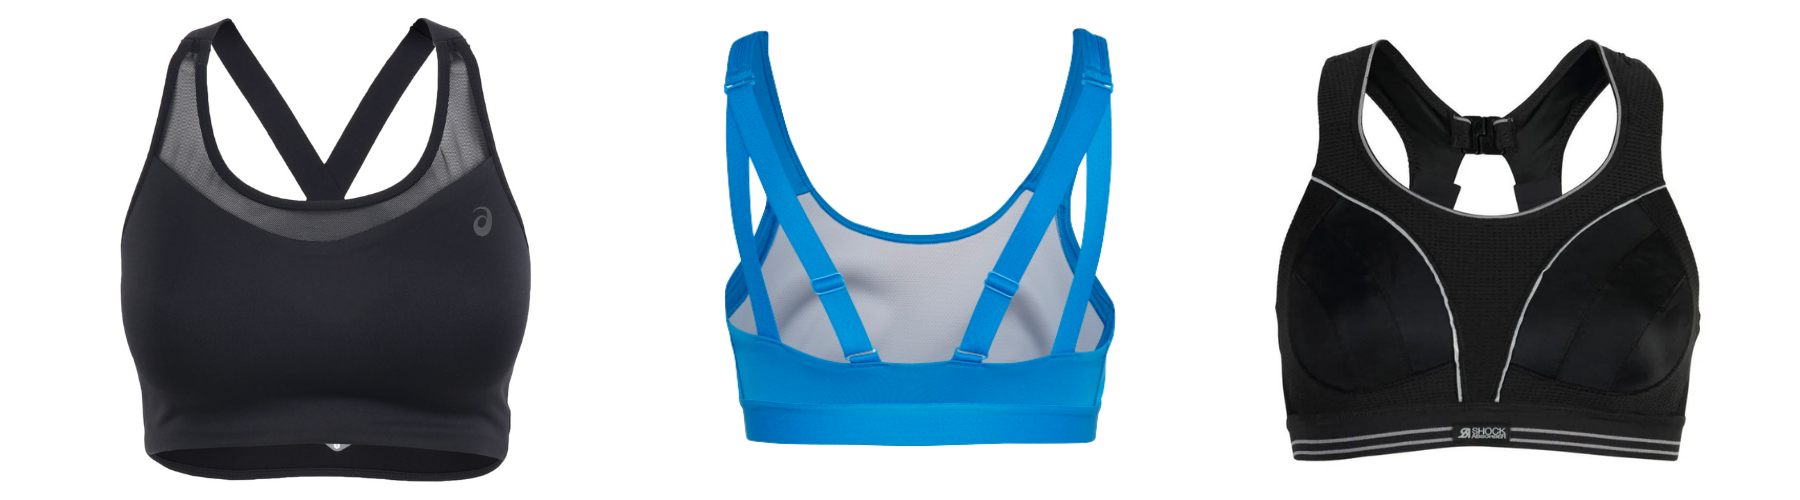 Top 10 high support sports bras for running and high-impact sports